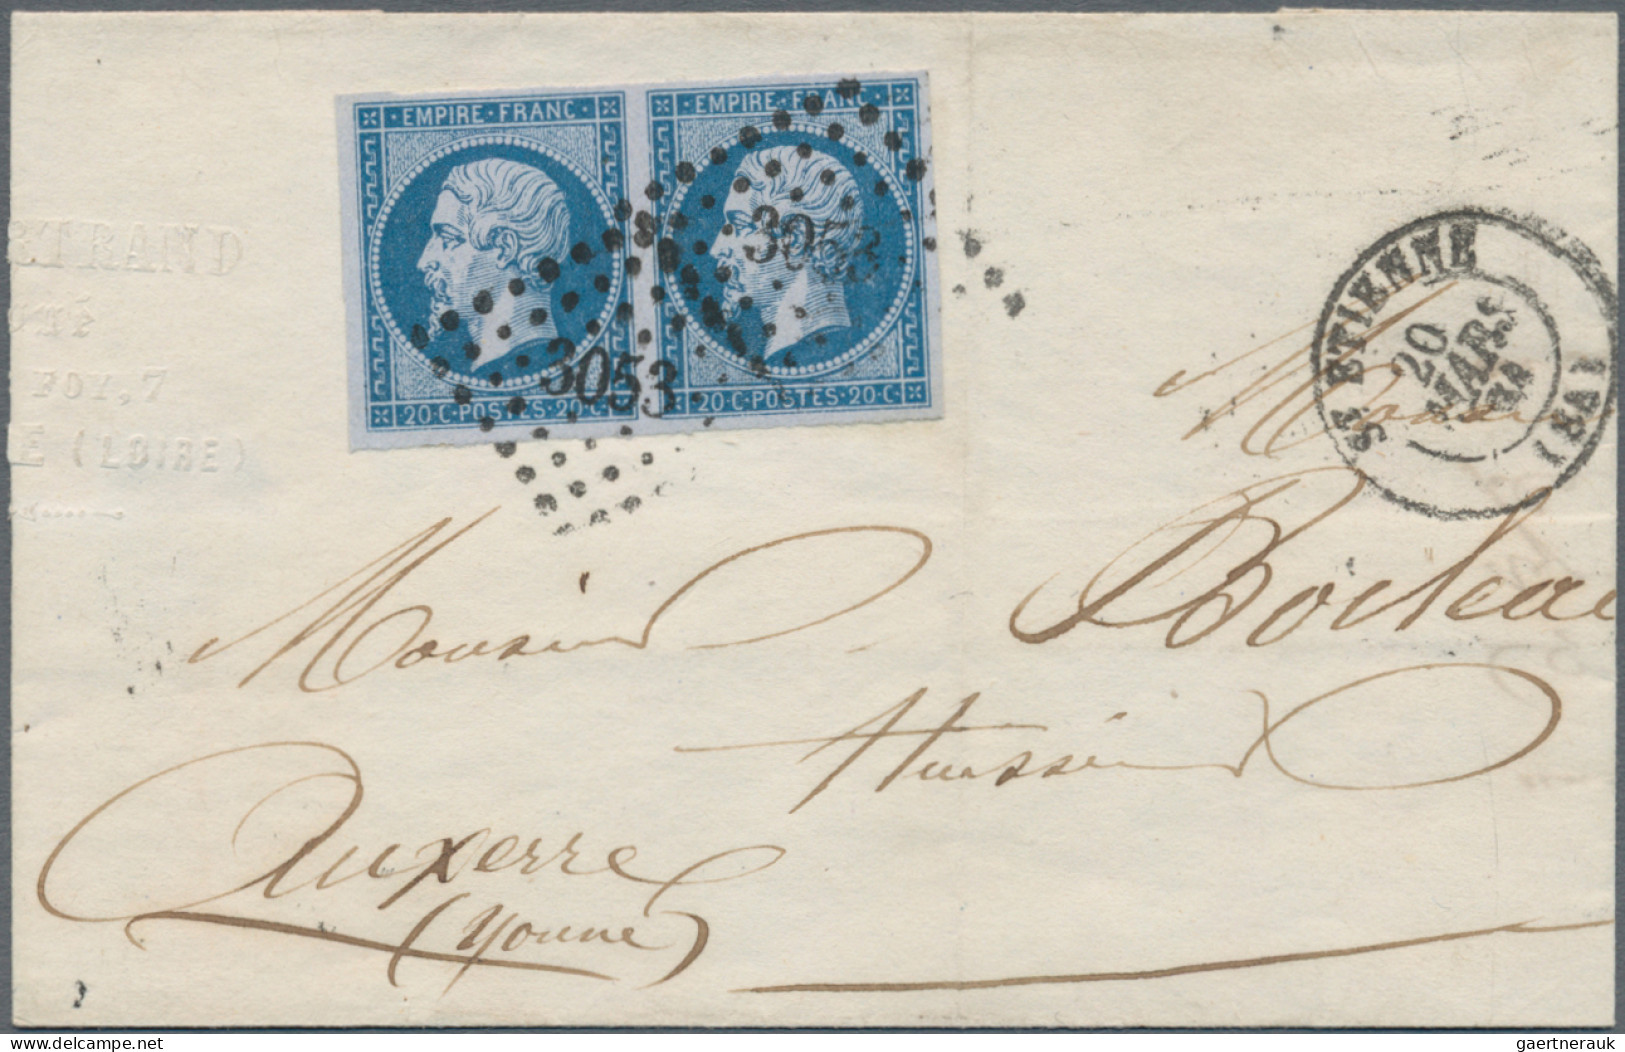 France: 1853/1875, assortment of apprx. 80 letters bearing frankings mainly Empi